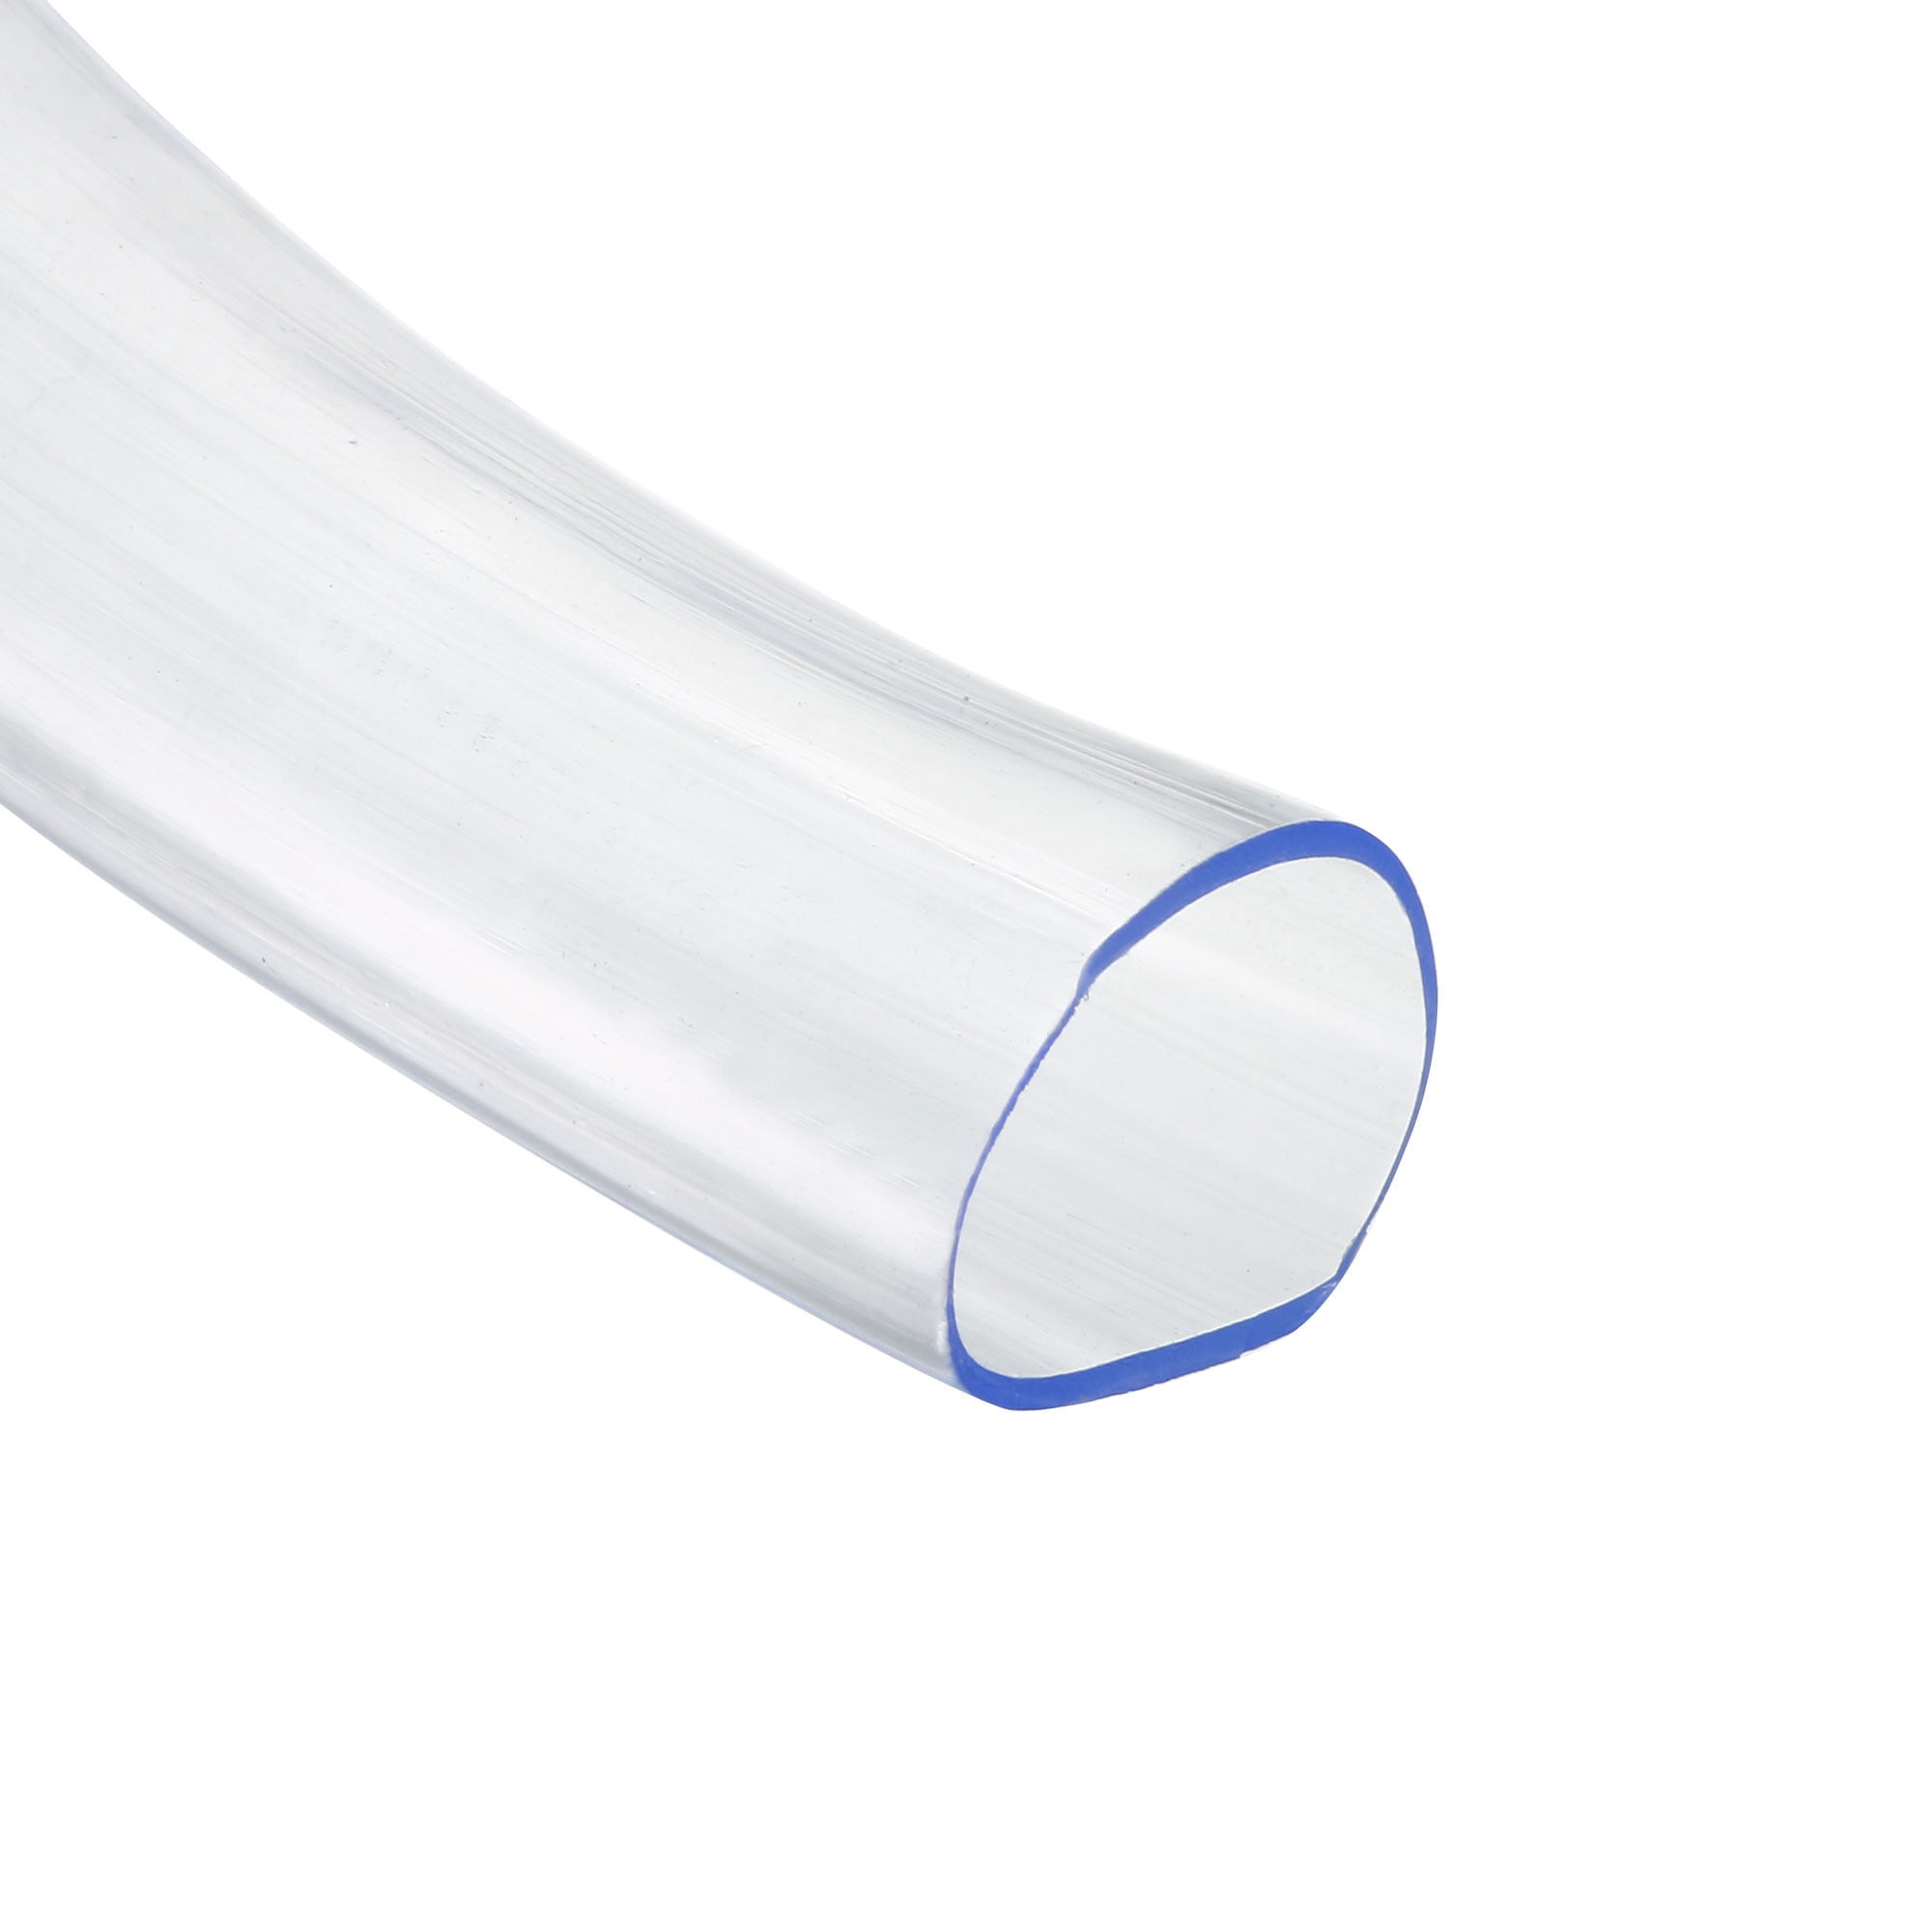 Non-Toxic Tube PVC Hose Tubing Extra Thick Wall Plastic Clear Flexible 